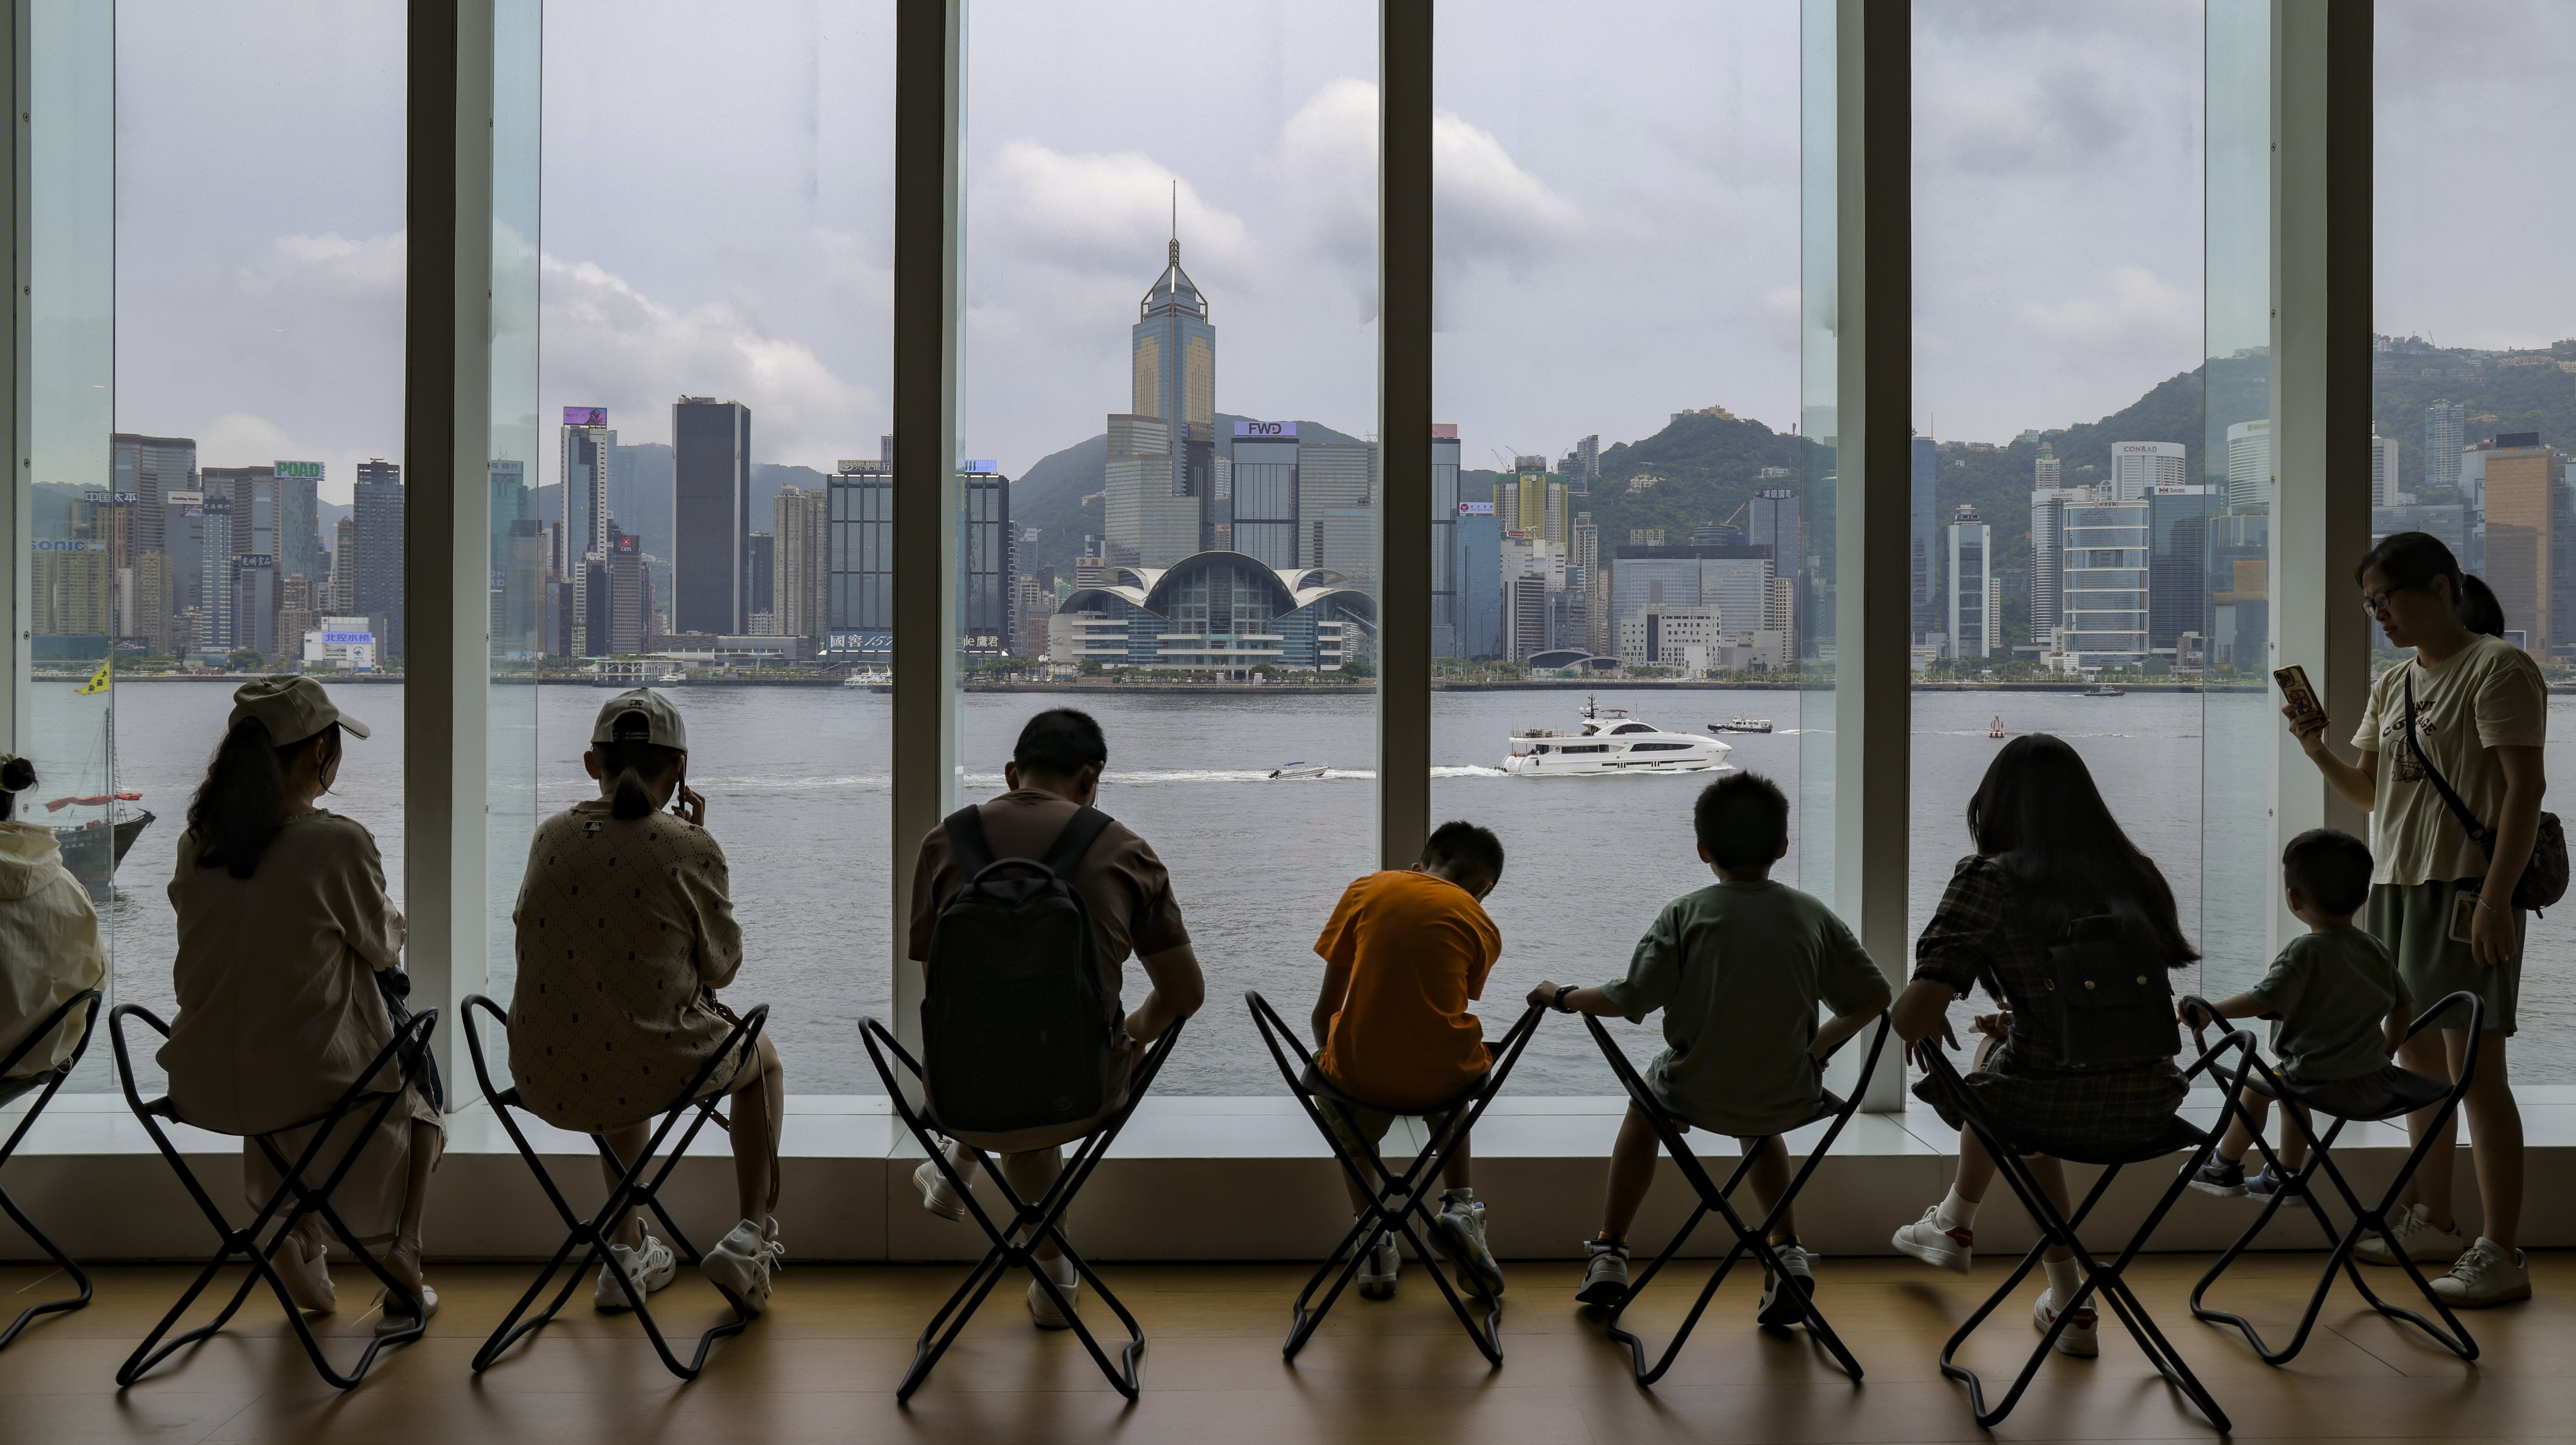 A view of Victoria Harbor from the window at the Hong Kong Museum of Arts in Tsim Sha Tsui. Photo: Jelly Tse